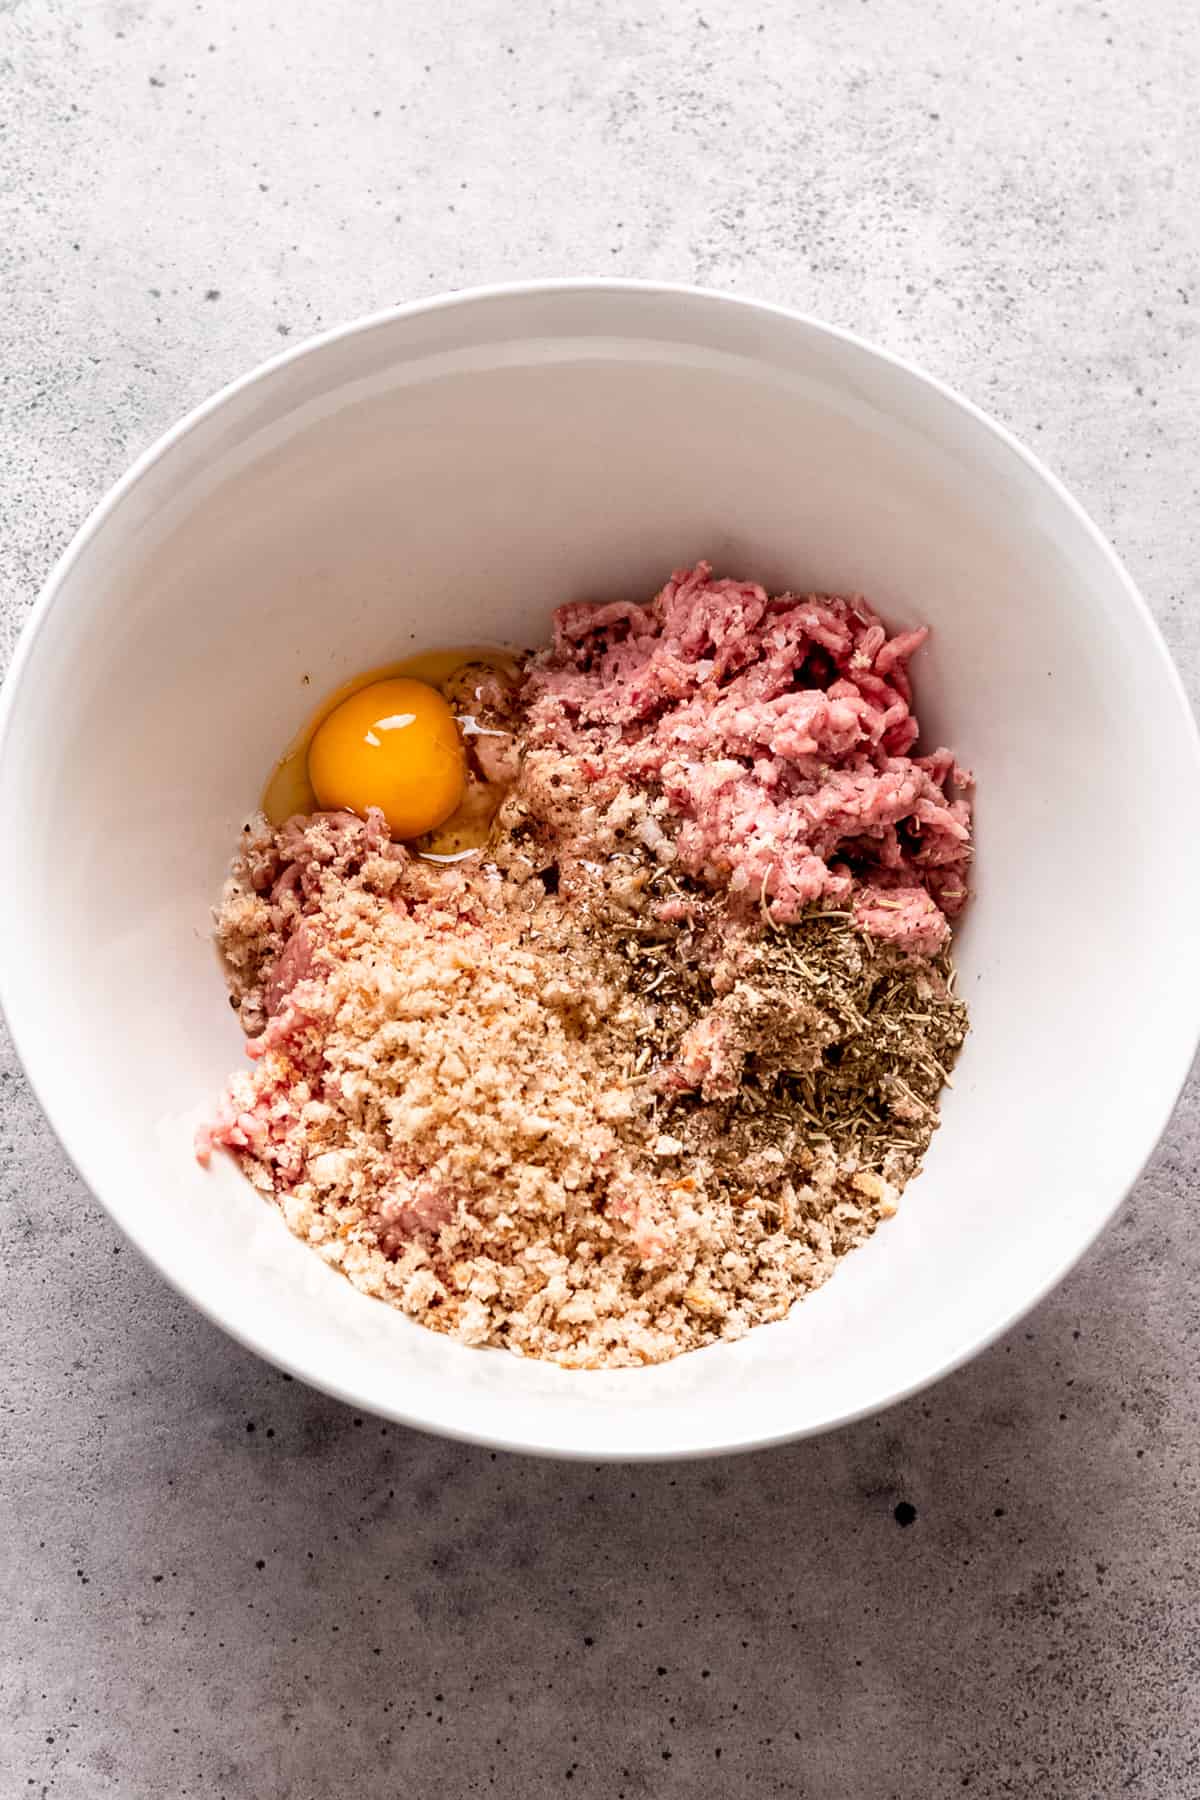 Lamb meatball mix in a bowl.